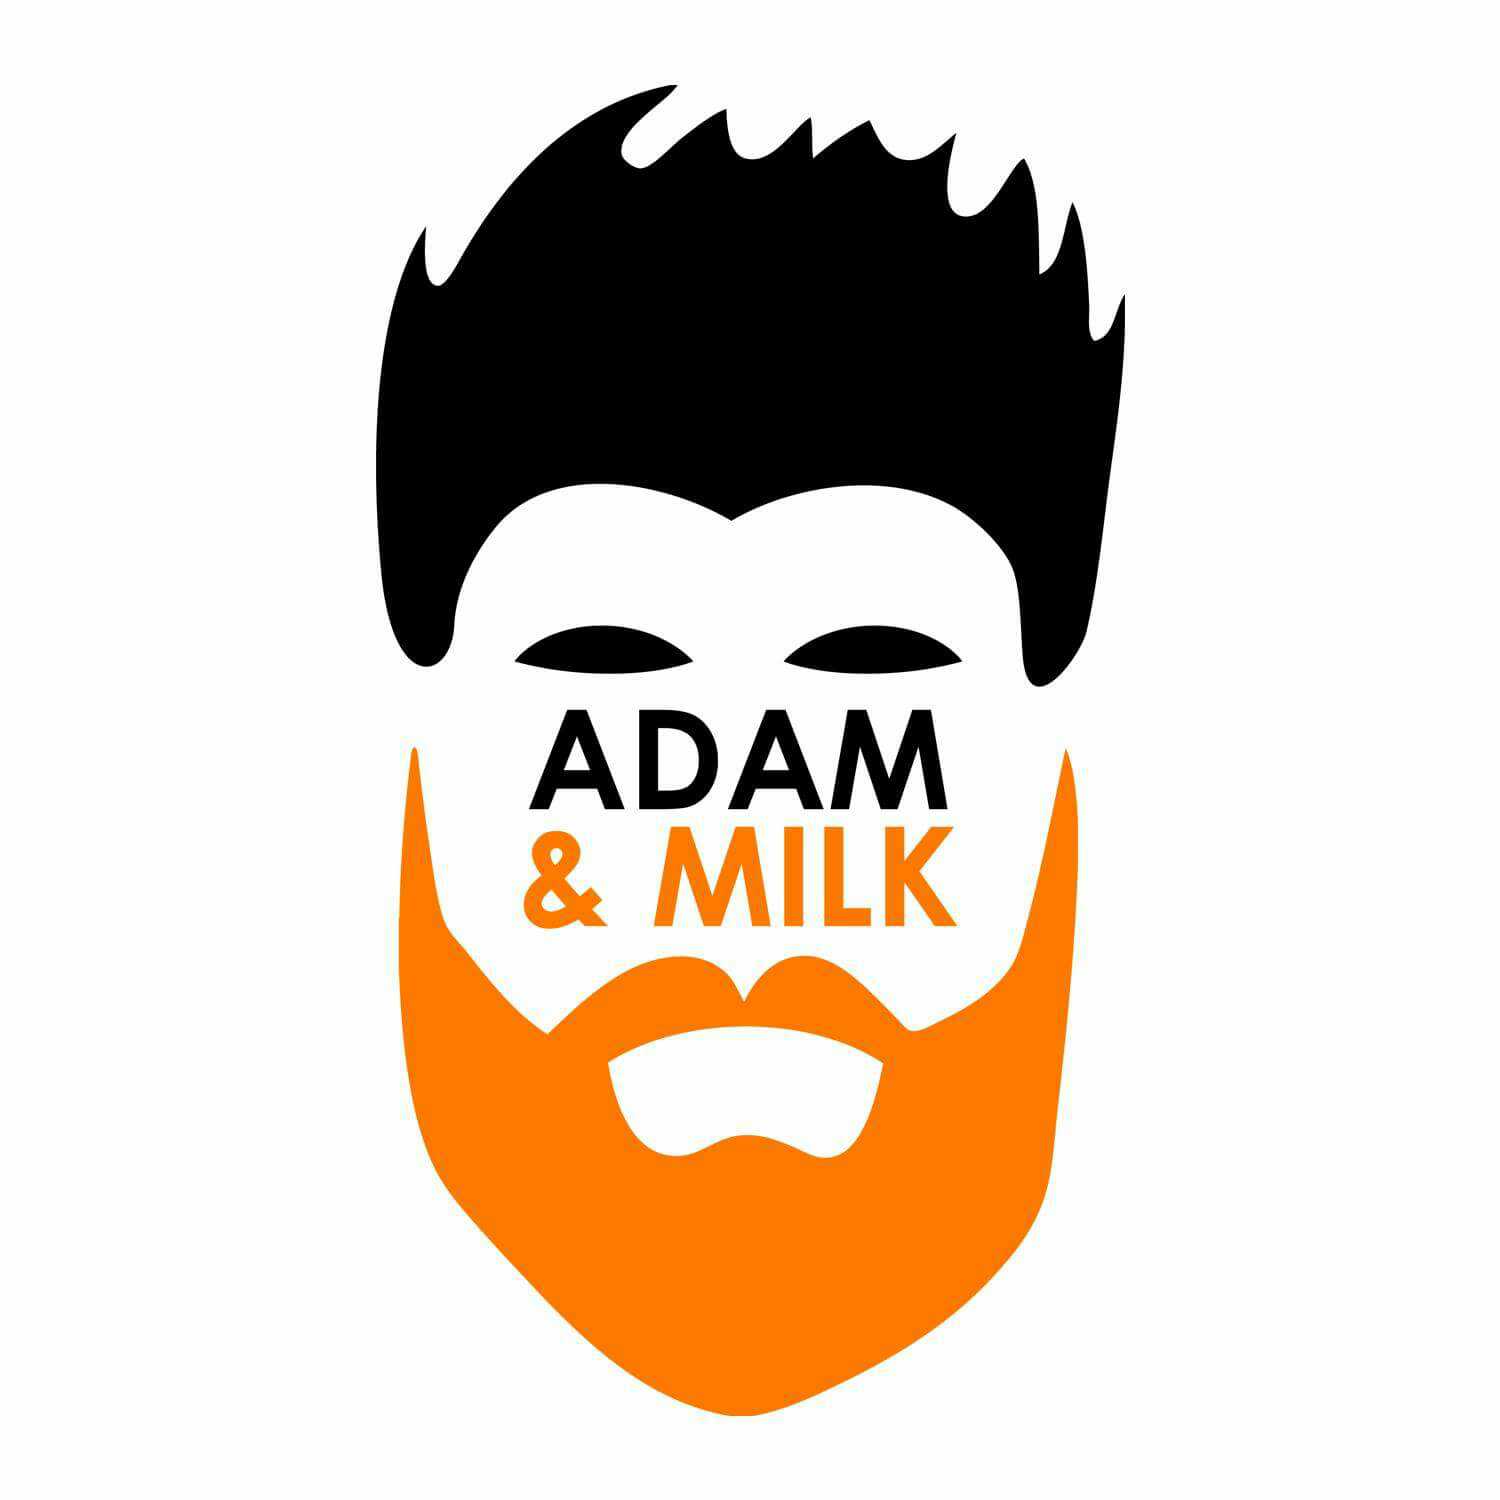 035 - We need to stop talking about Pedos - Unpleasant with Adam and Milk